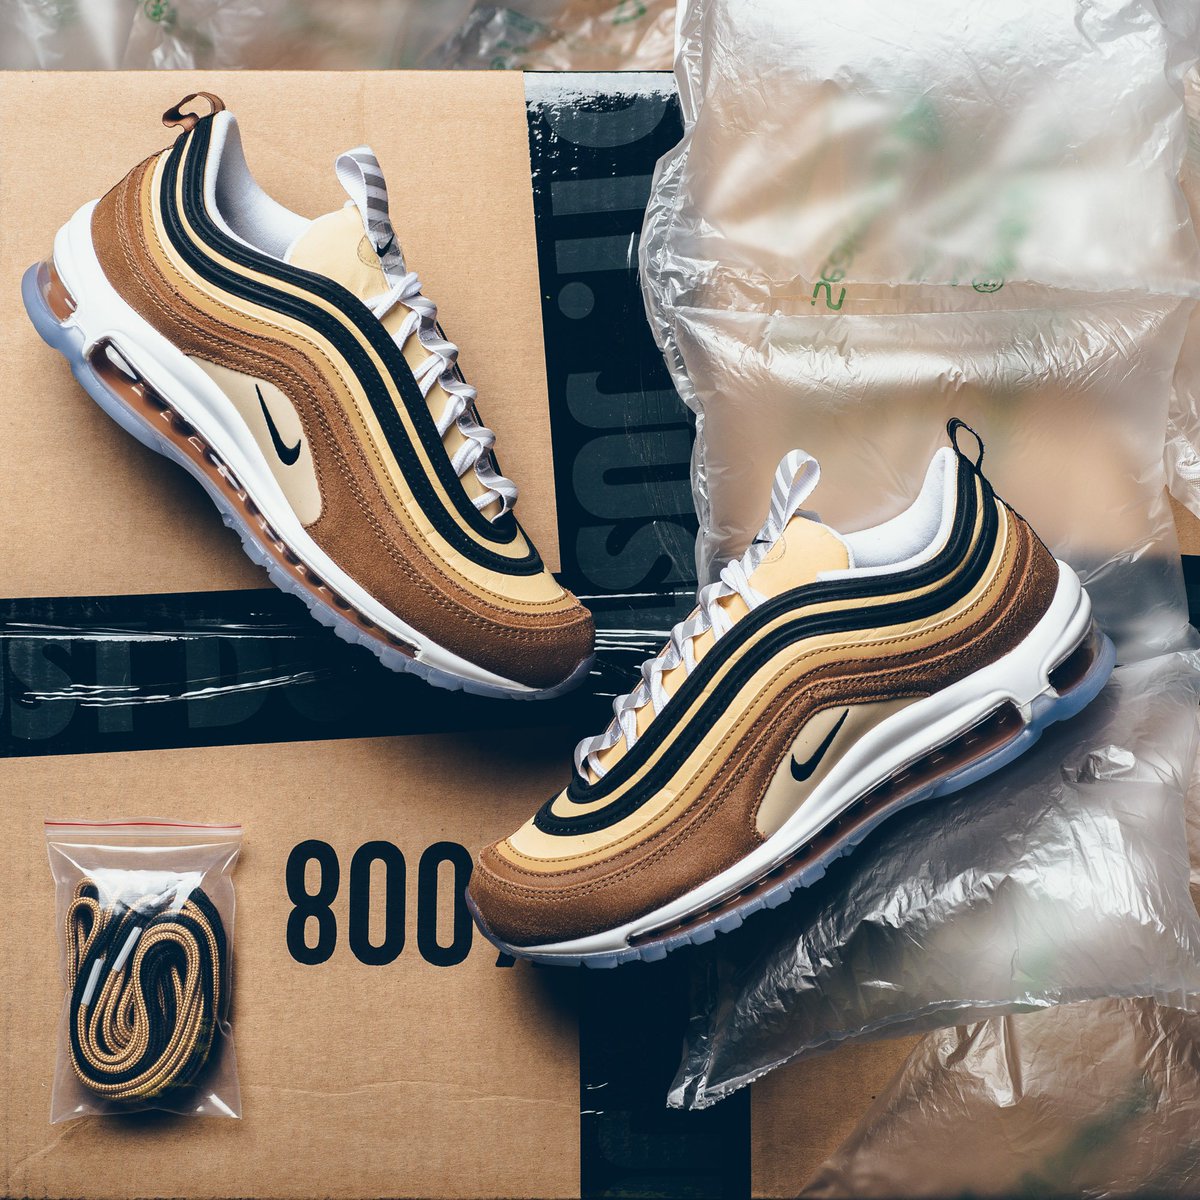 Sneaker Politics on Twitter: "Now Available :: Nike Air Max 97 - Ale Brown /Black/Elemental Gold :: https://t.co/zg0liRWMAg https://t.co/eaLXB7vm6Y" /  Twitter